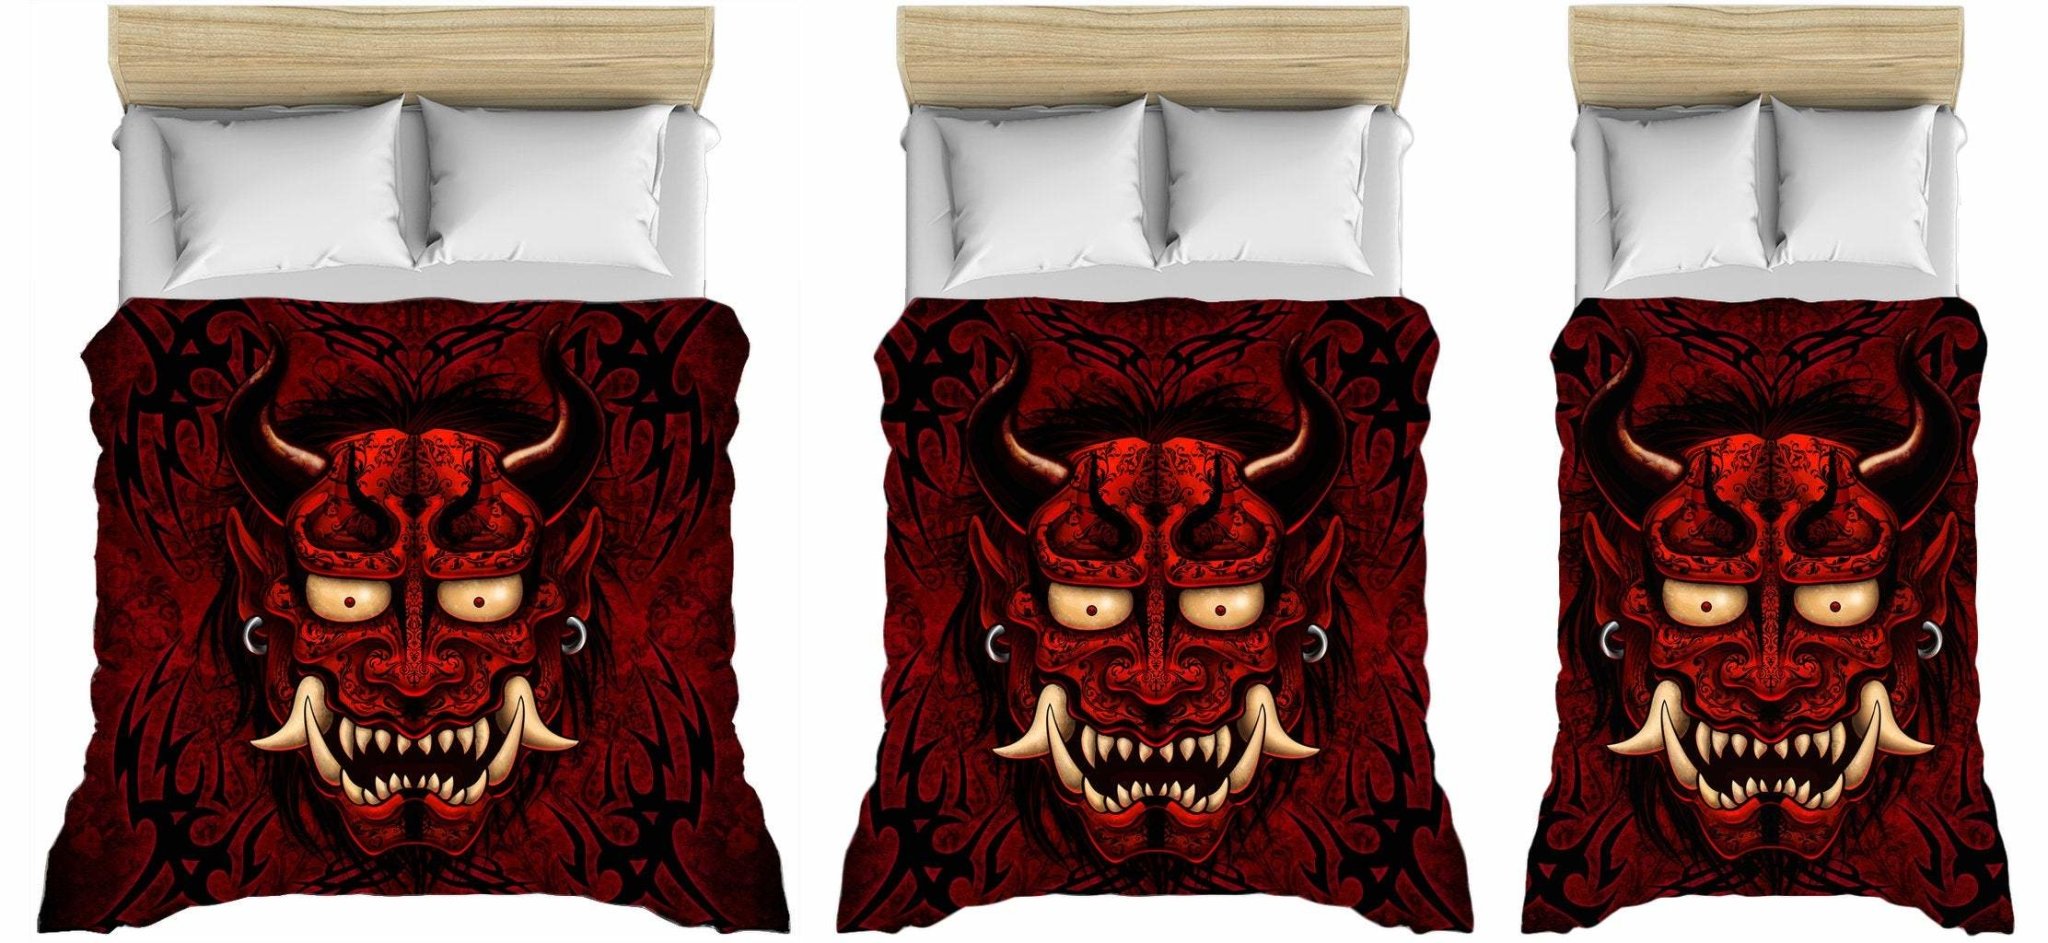 Oni Bedding Set, Comforter and Duvet, Goth Art, Alternative Bed Cover and Bedroom Decor, King, Queen and Twin Size - Red and Black Tattoo, Japanese Demon - Abysm Internal